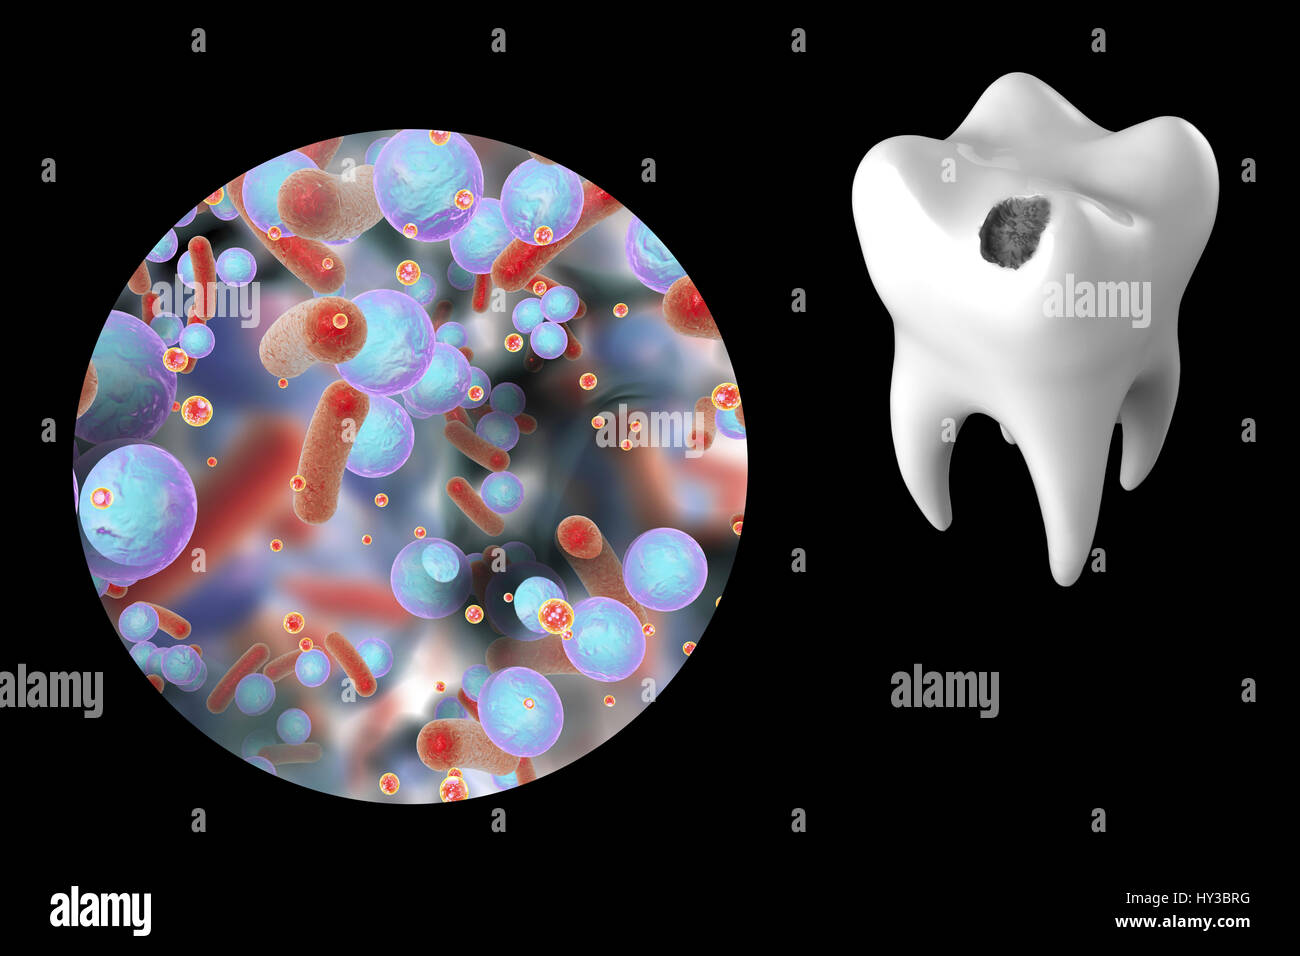 Tooth decay. Computer illustration of a tooth with a cavity and a close-up view of the bacteria that cause caries formation. Stock Photo